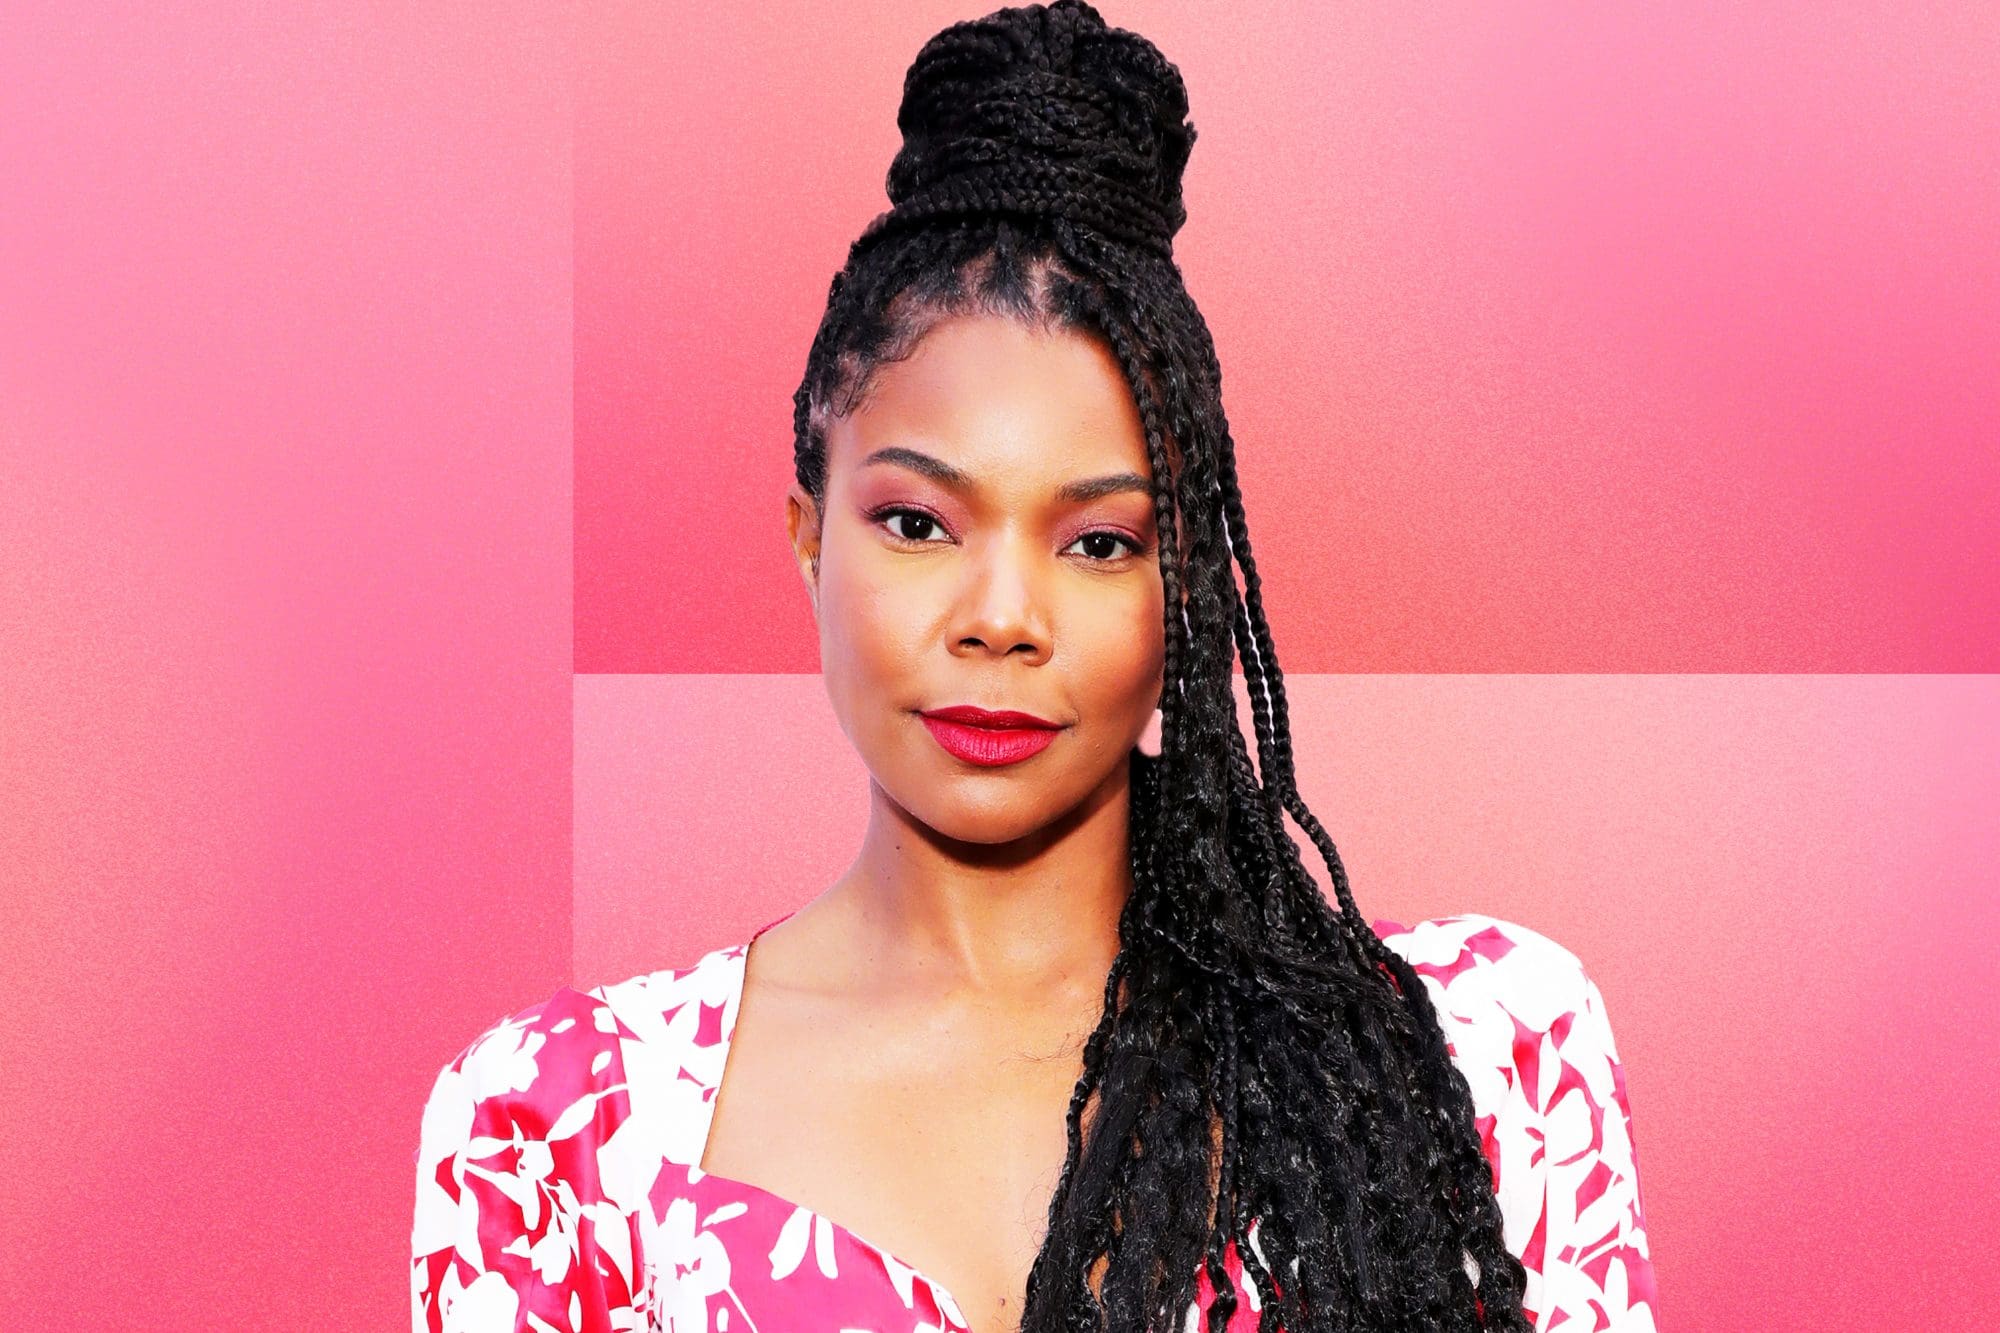 gabrielle-union-shares-sweet-new-pics-featuring-kaavia-james